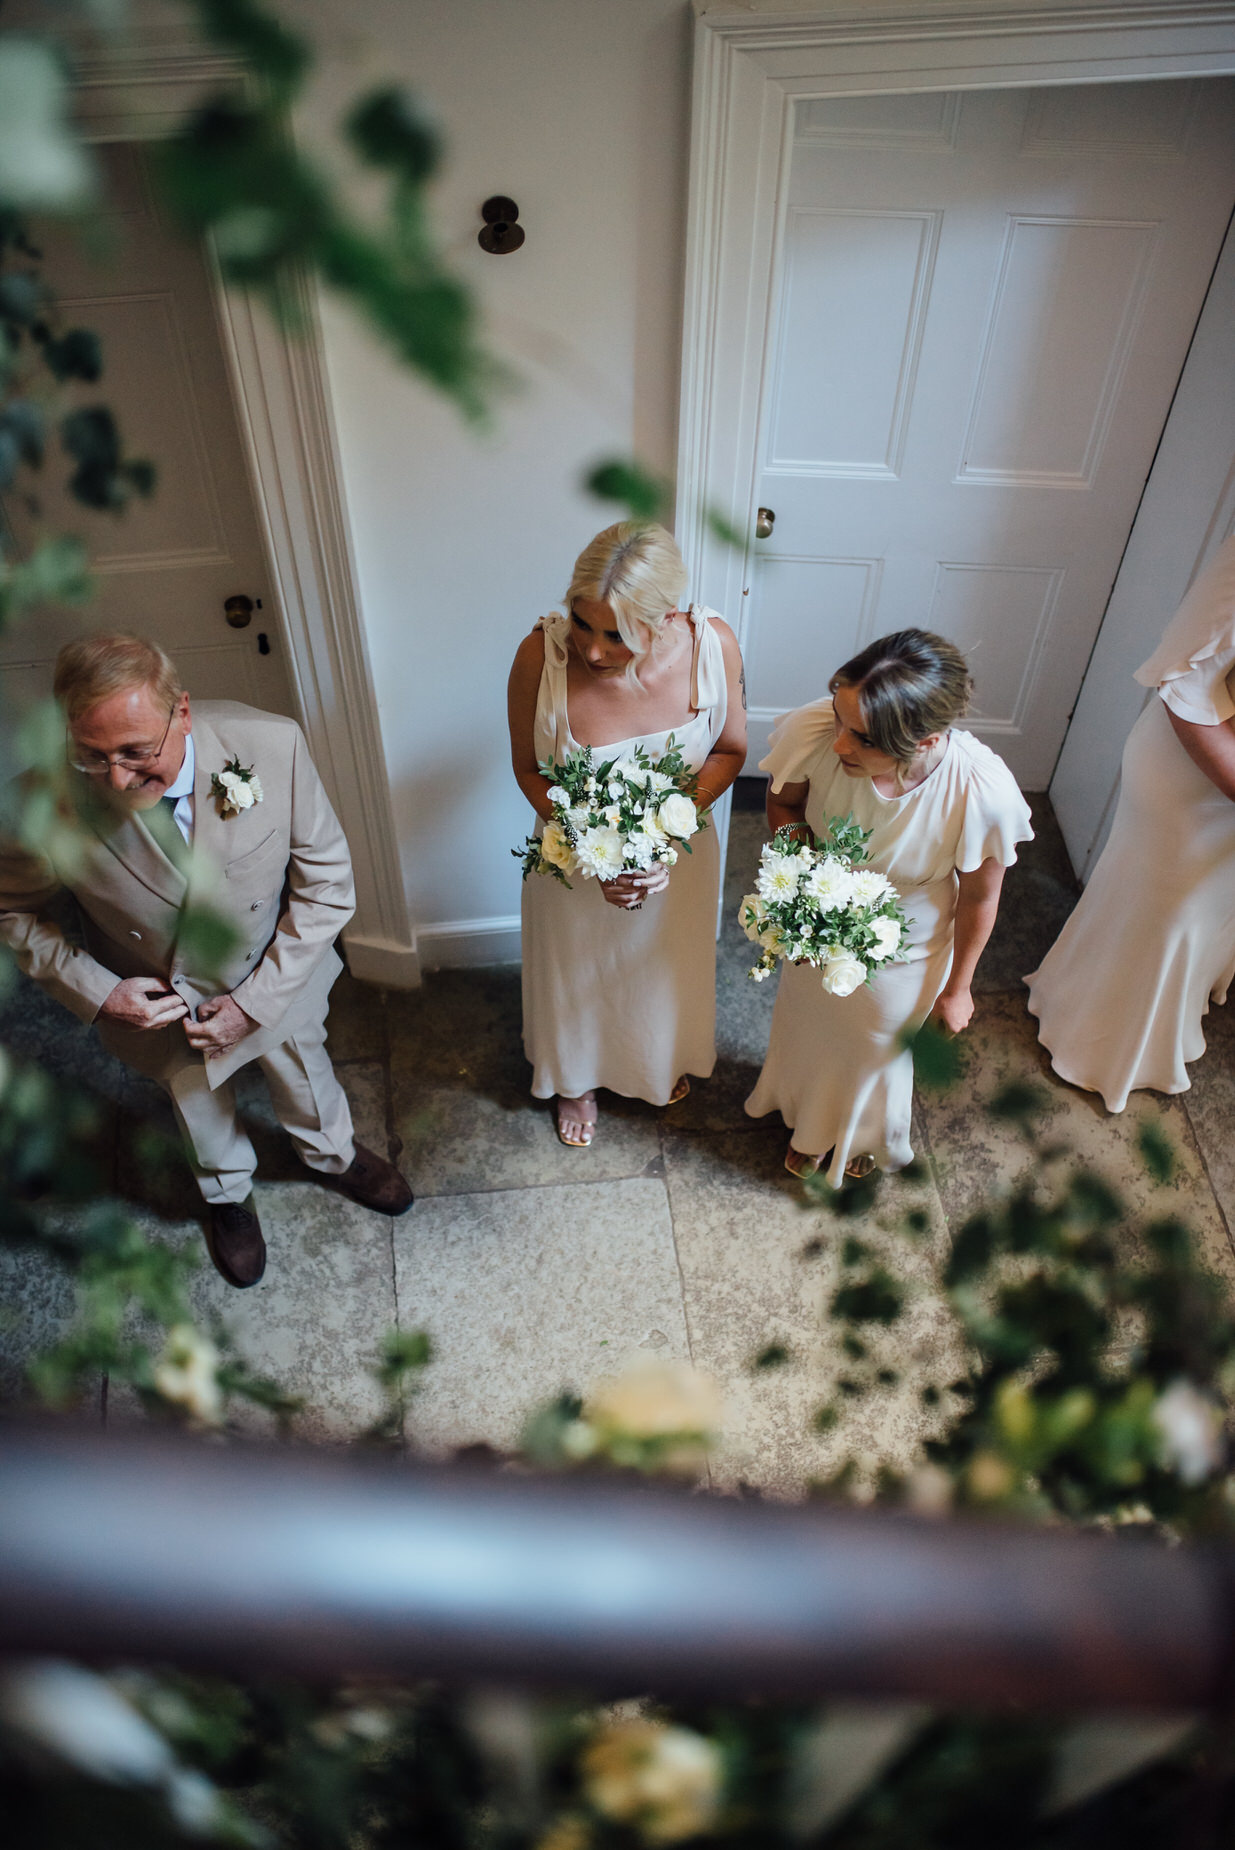 reportage wedding photography, aswarby house, Aswarby Rectory Wedding, michelle wood photographer